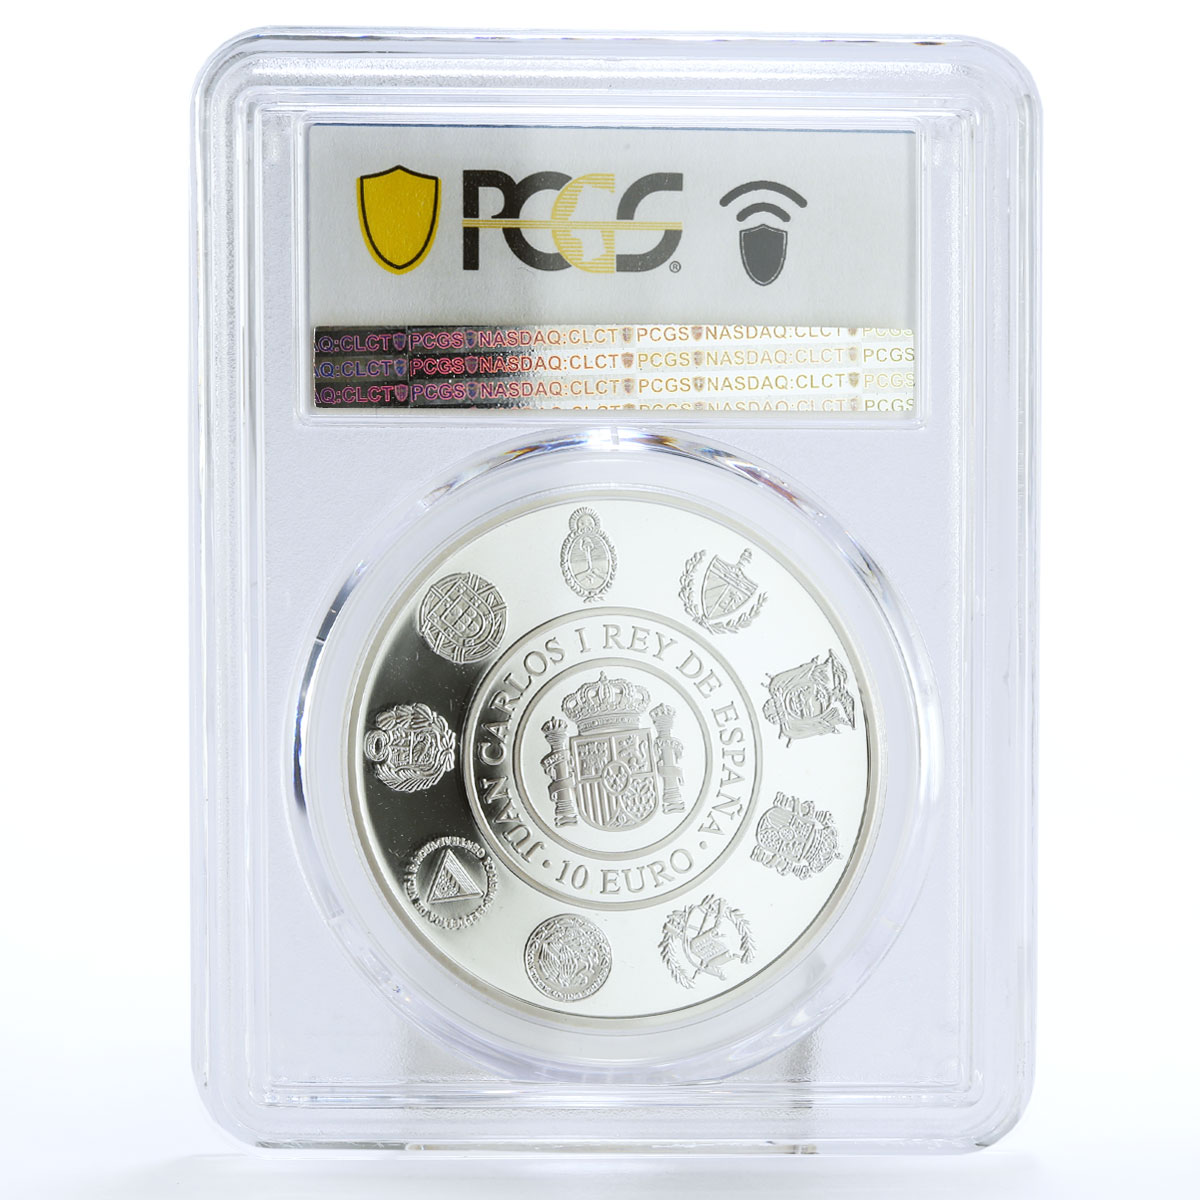 Spain 10 euro Olympic Sailing Vela Boat Ship PR67 PCGS proof silver coin 2007